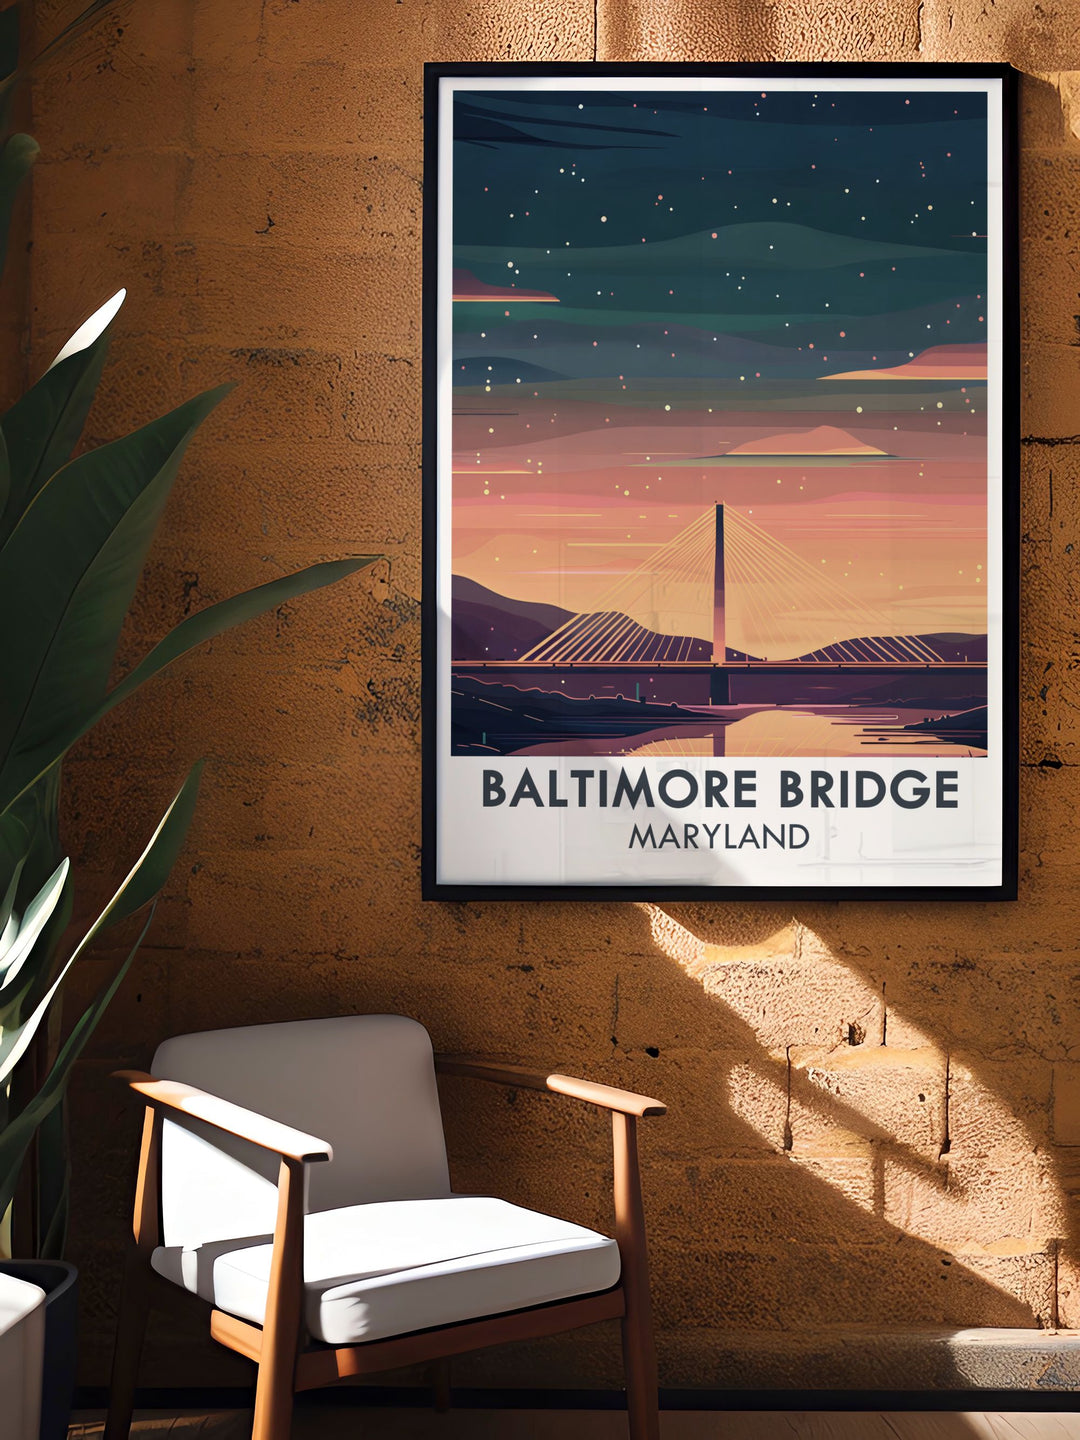 Baltimore Key Bridge design poster capturing the future vision of the new proposed bridge. Perfect for Maryland artwork and Baltimore wall art collections. An ideal addition to any space, showcasing Maryland's evolving skyline